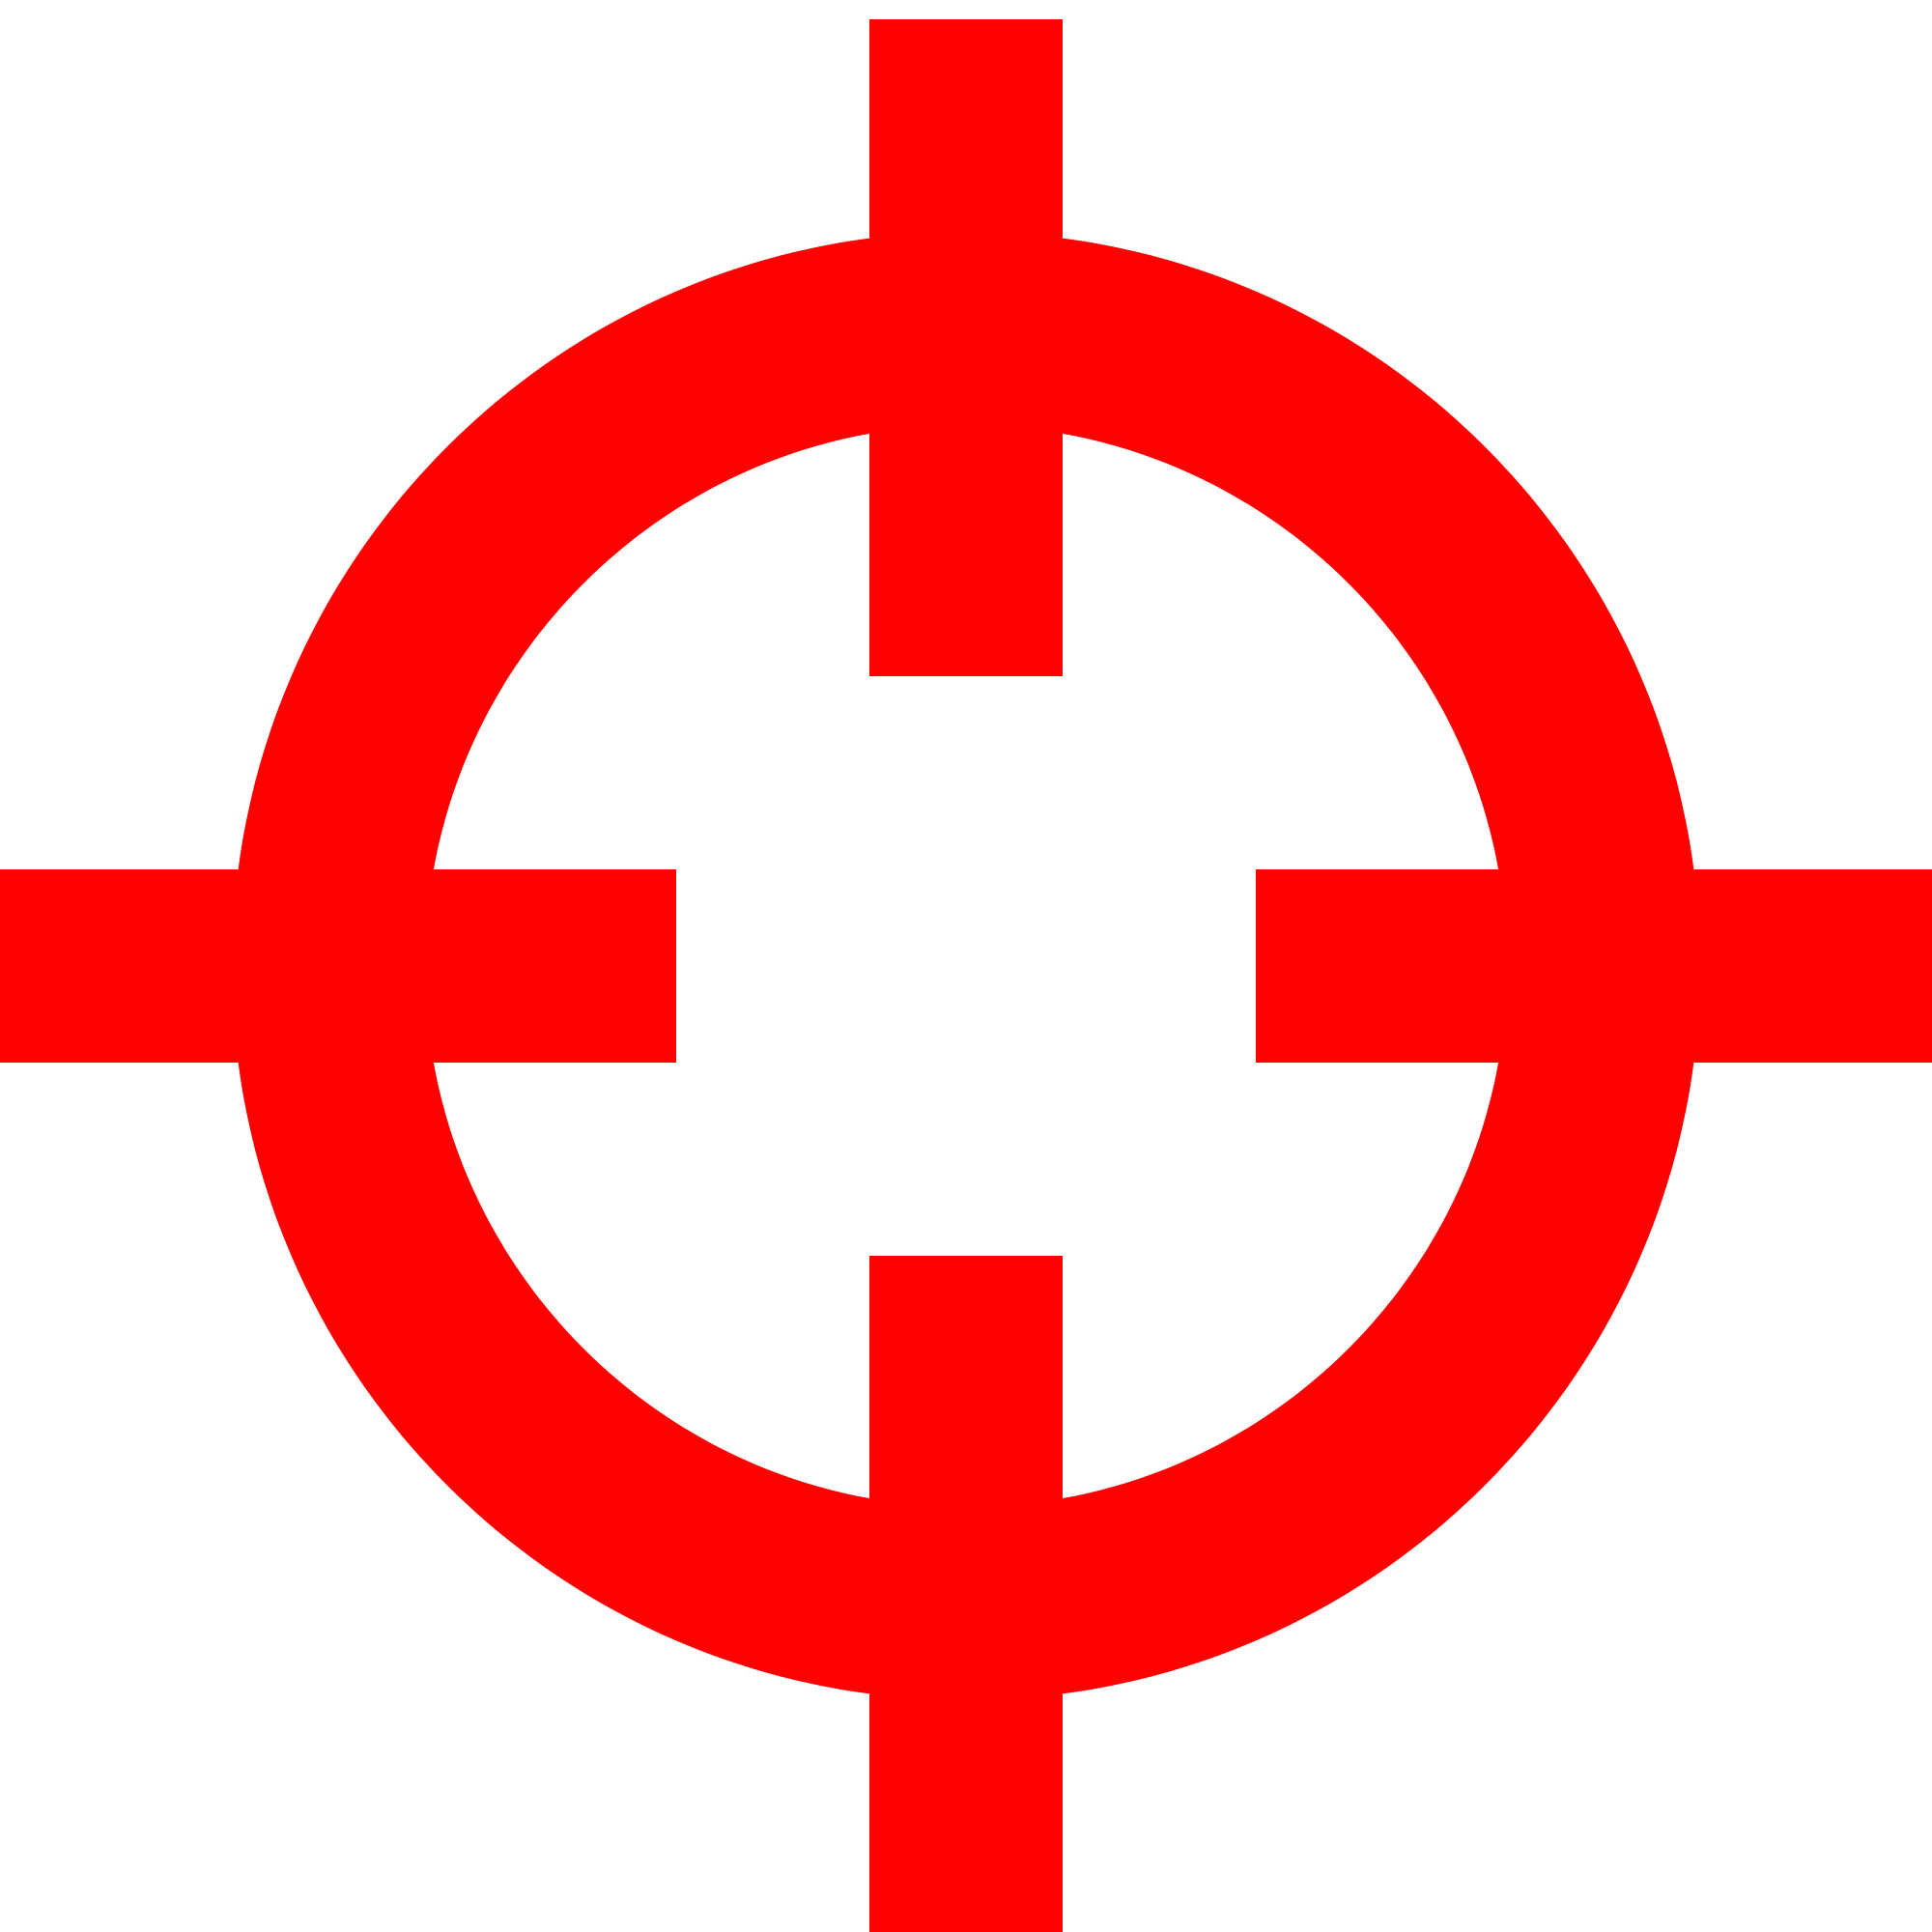 File:Crosshairs Red.svg